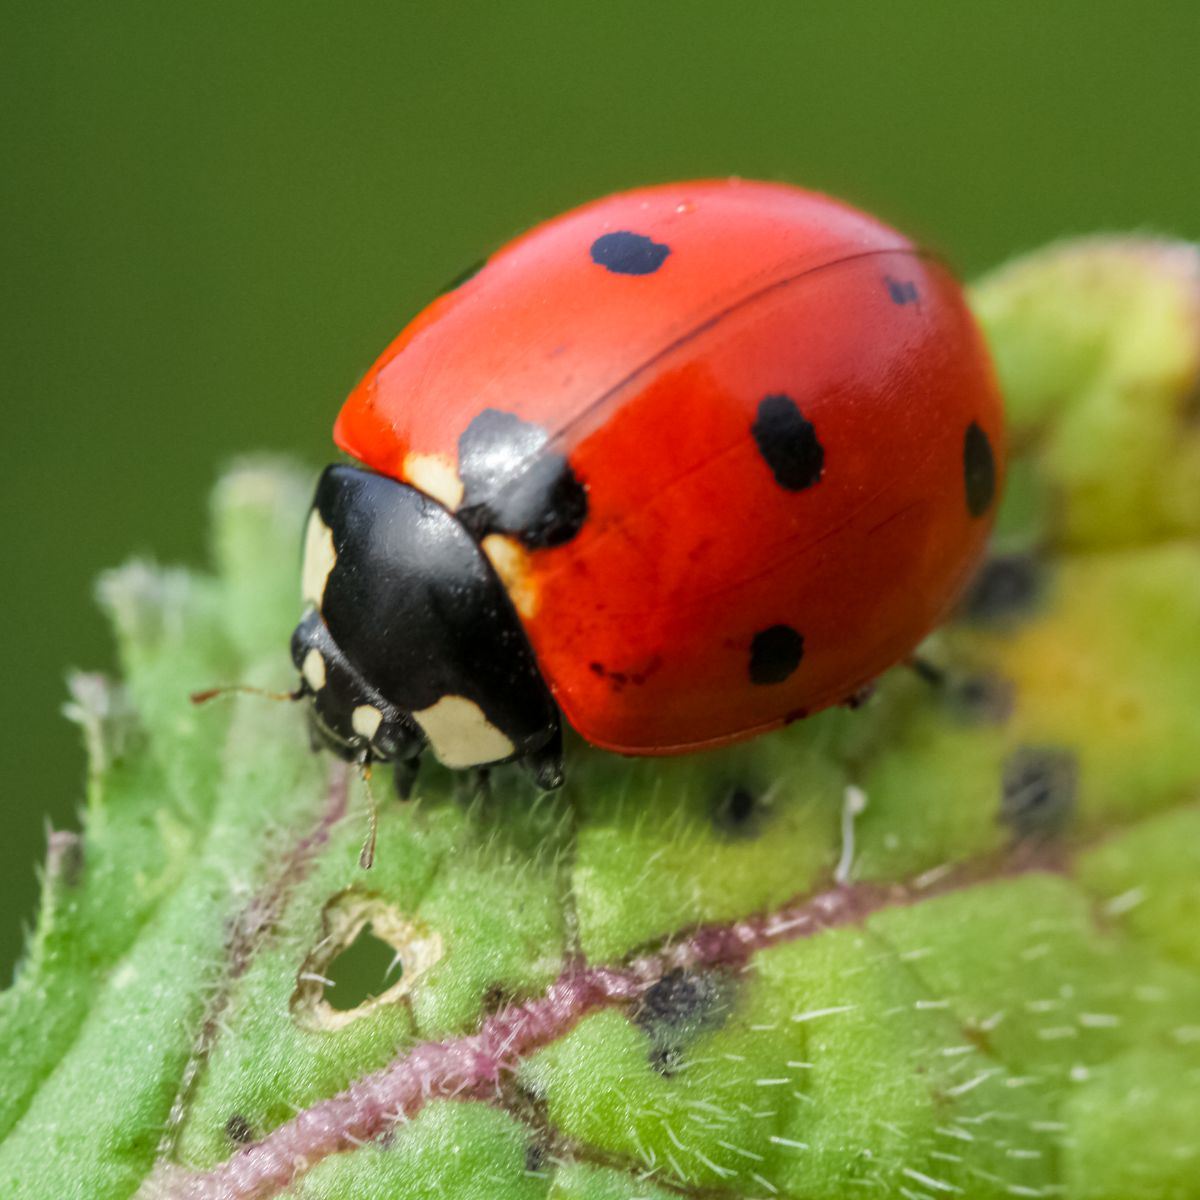 What is the spiritual meaning of the ladybug